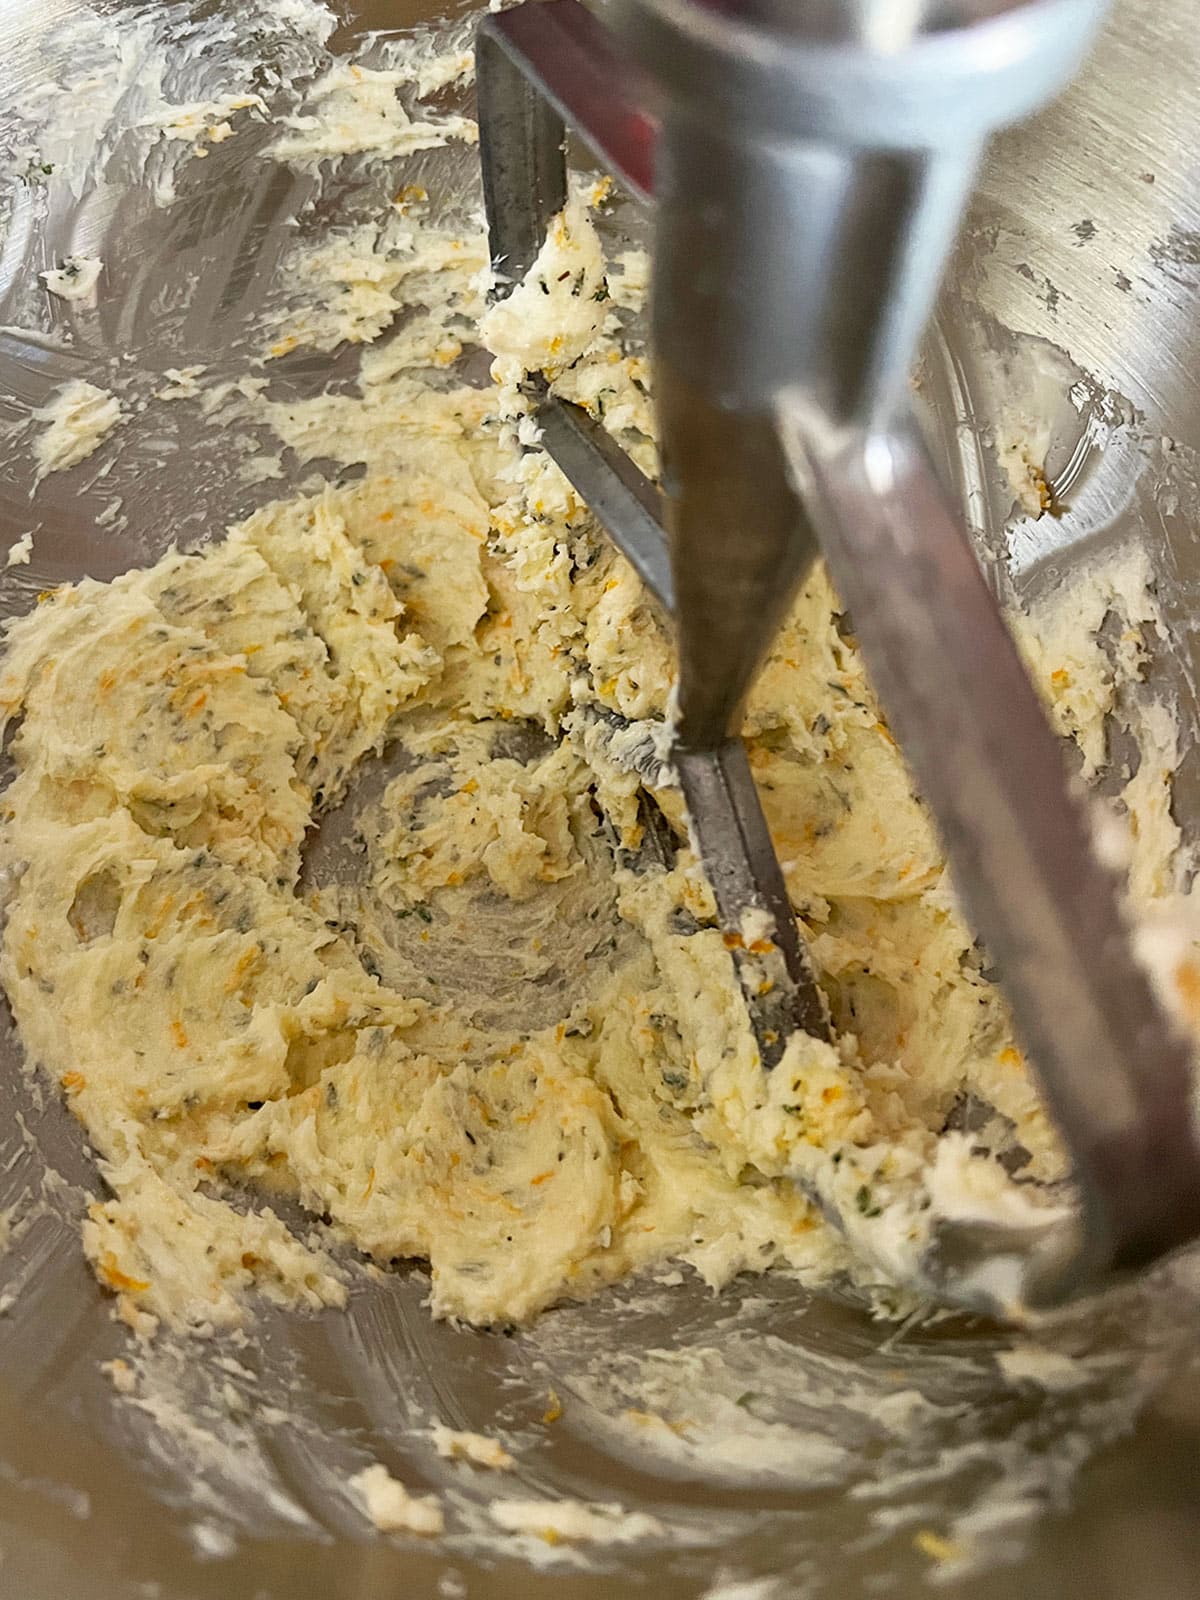 Butter and sugar mixture creamed in the mixing bowl.